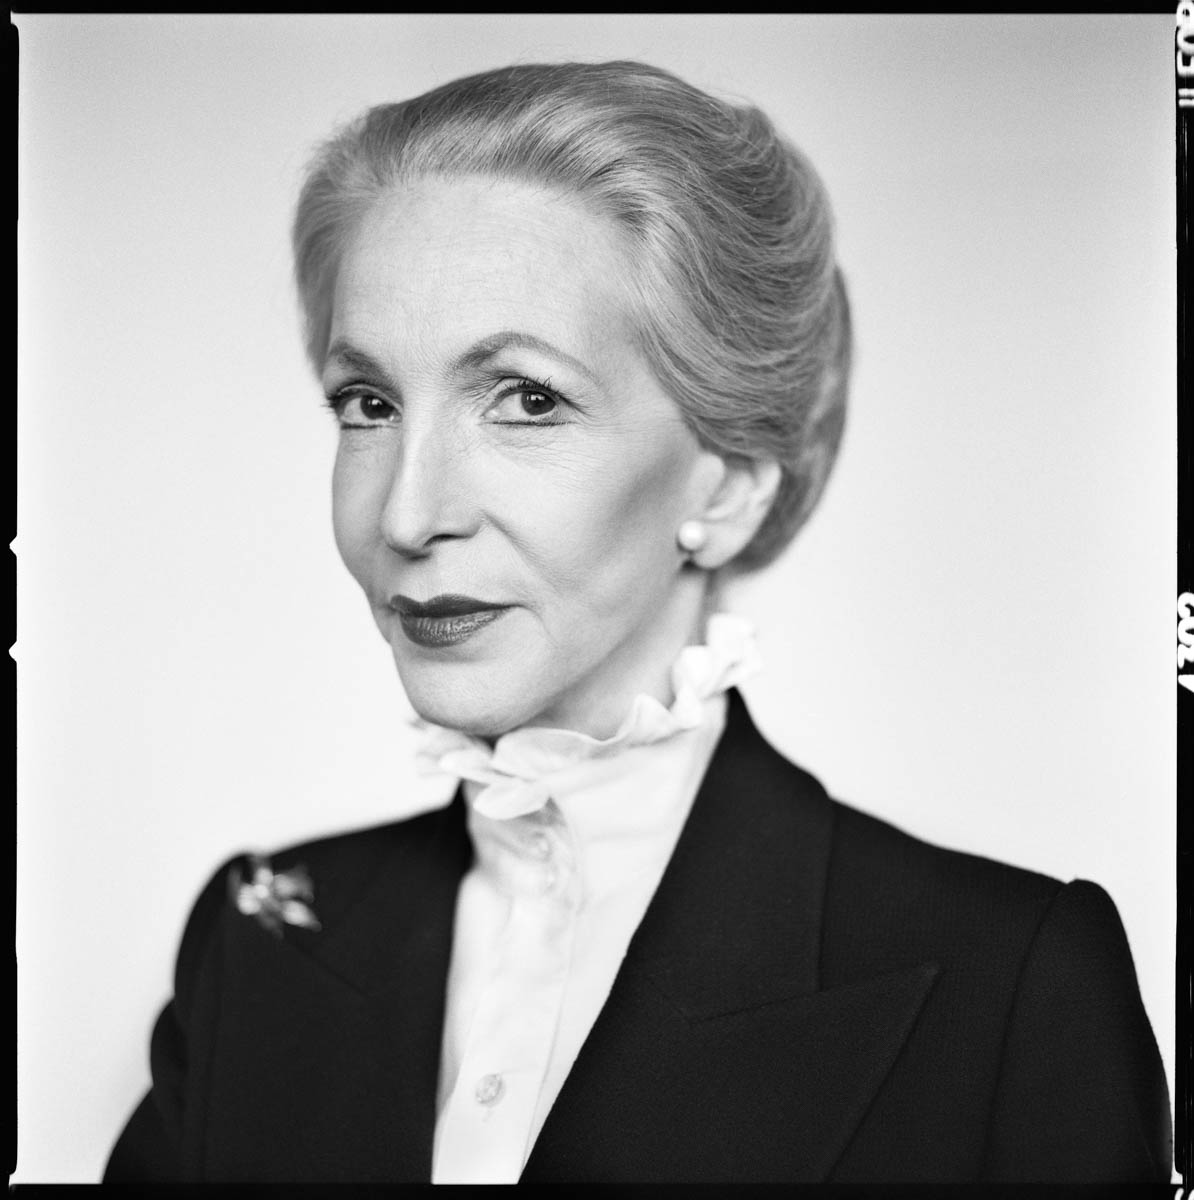 Lady Barbara Judge, lawyer, businesswoman and first female chair of the Institute of Directors